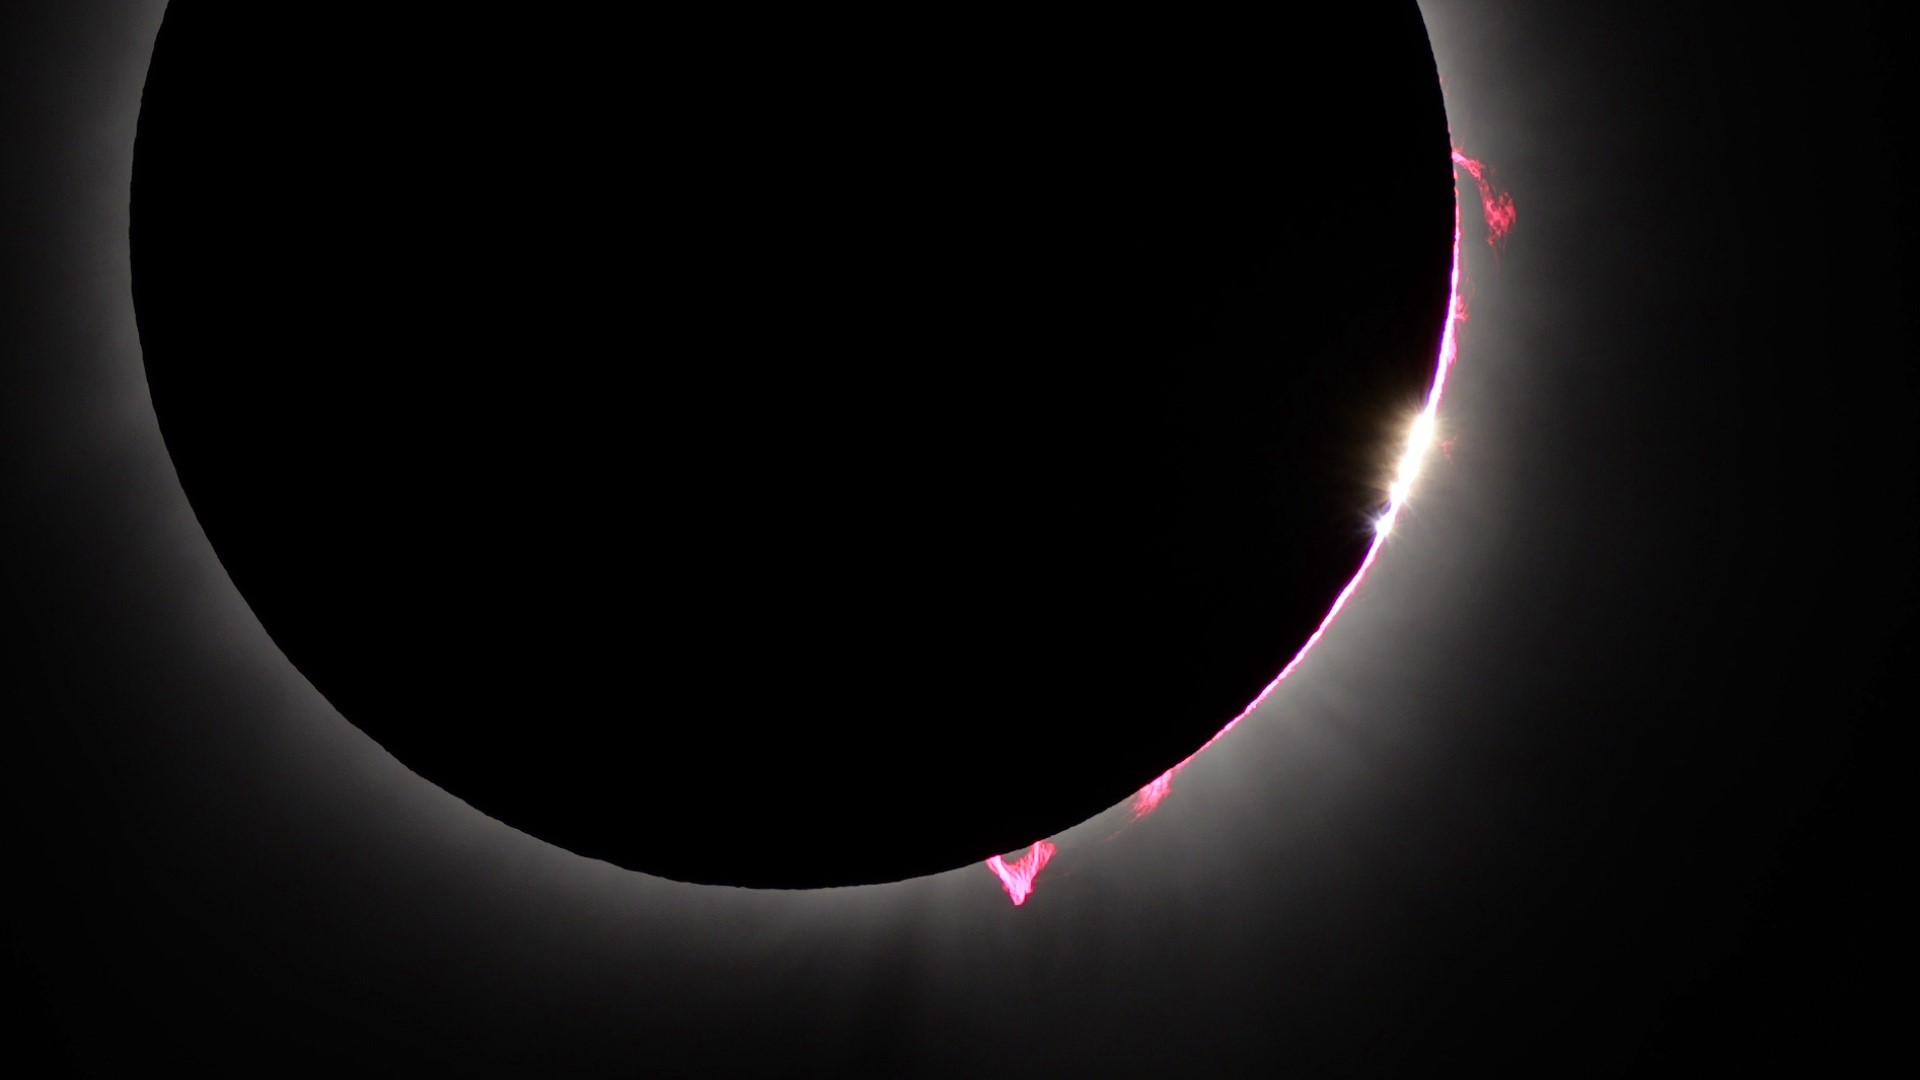 Red dots solar eclipse: Solar prominences seen during space event ...